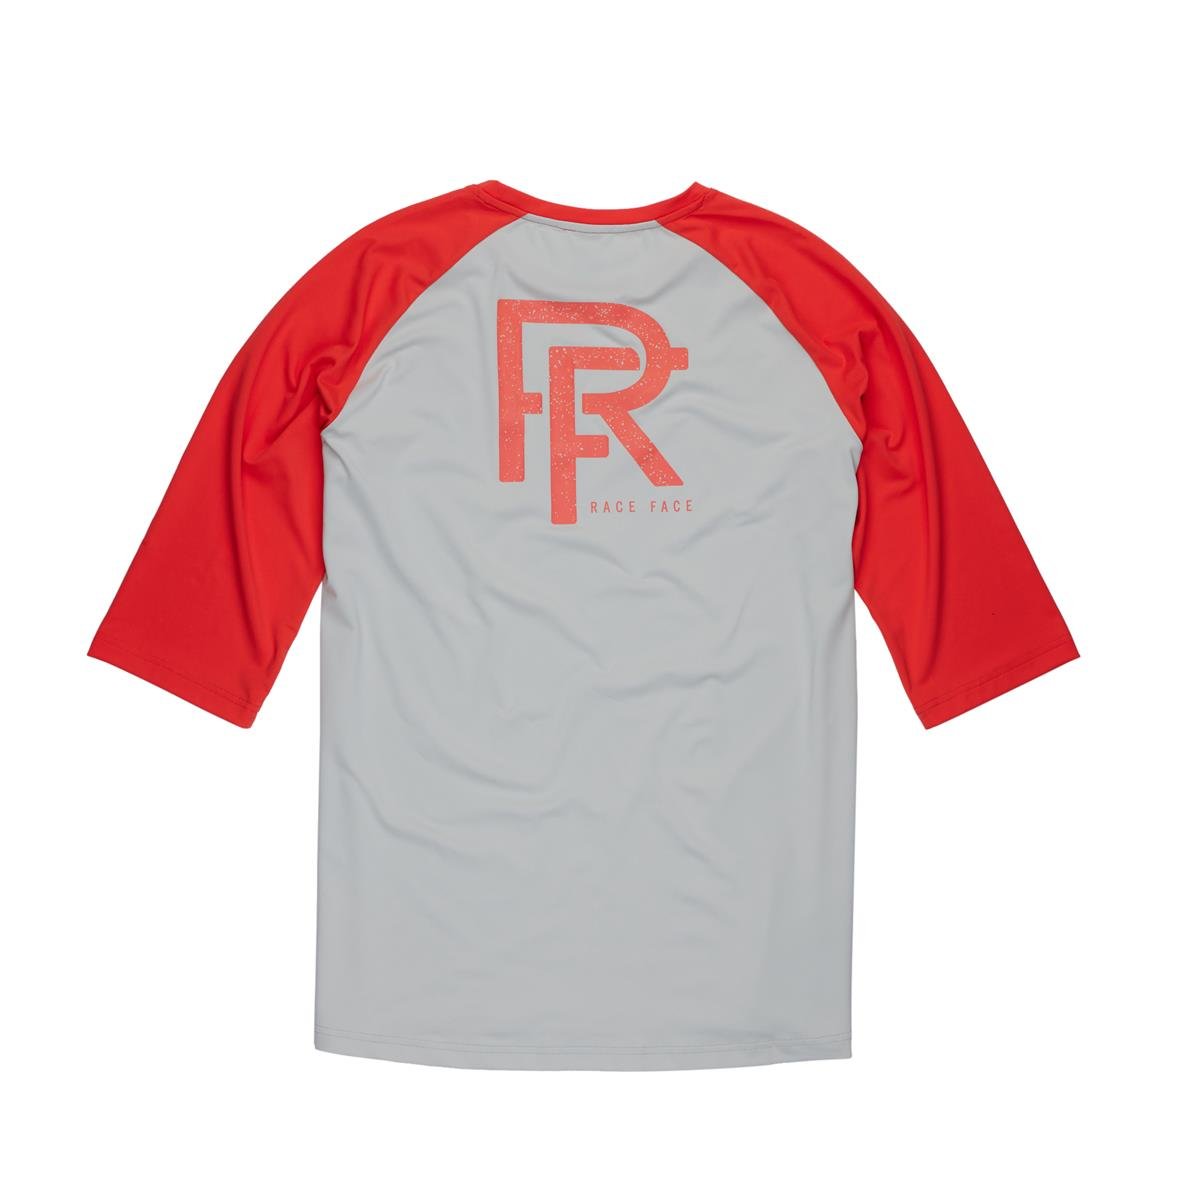 Race Face Tech Shirt ¾ Sleeve Commit Coral